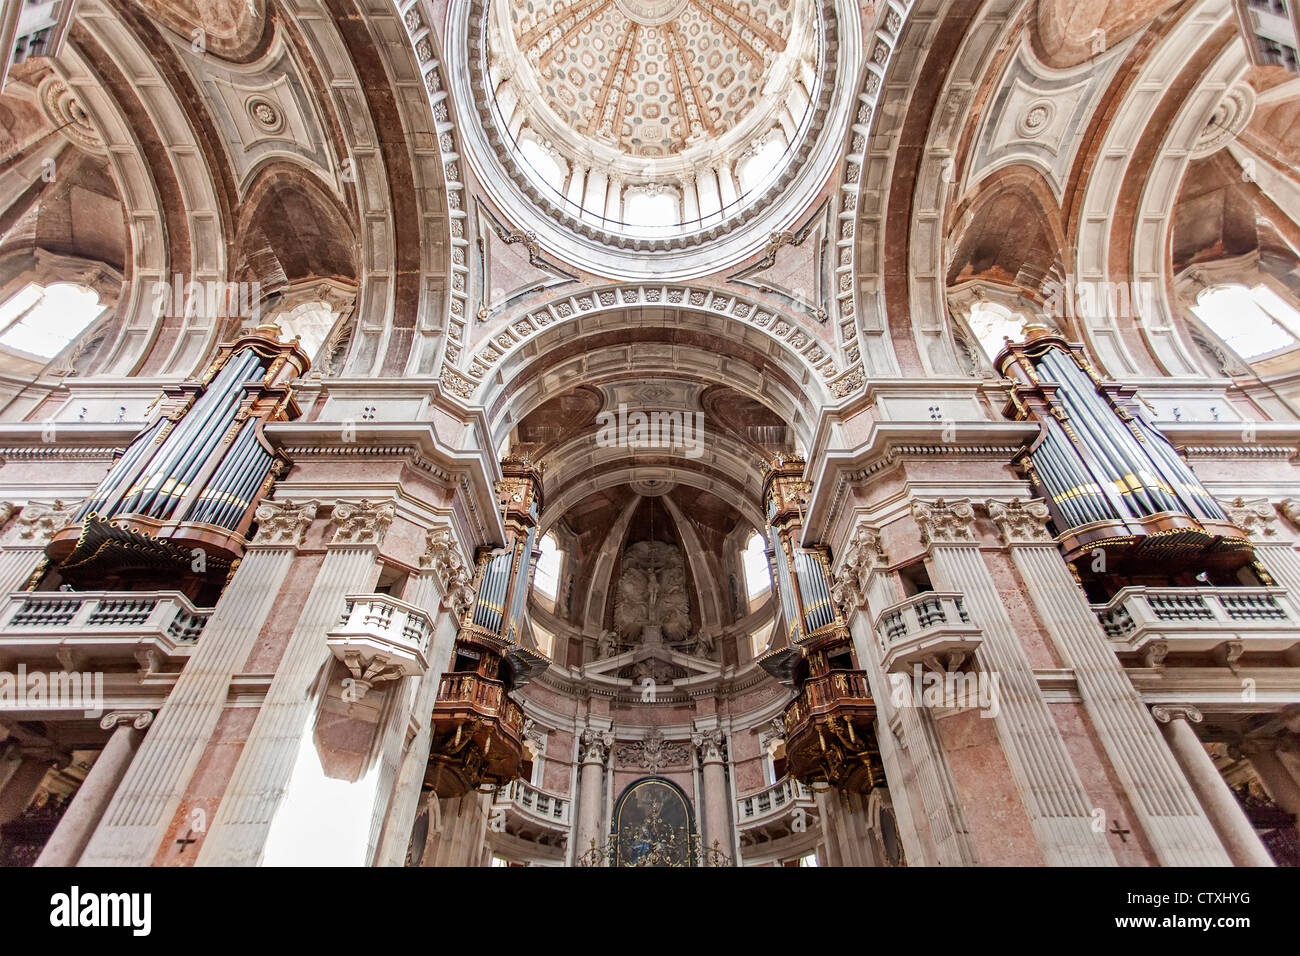 Four of the six organs and dome of the Basilica of the Mafra Palace and Convent in Portugal. Baroque architecture. Stock Photo